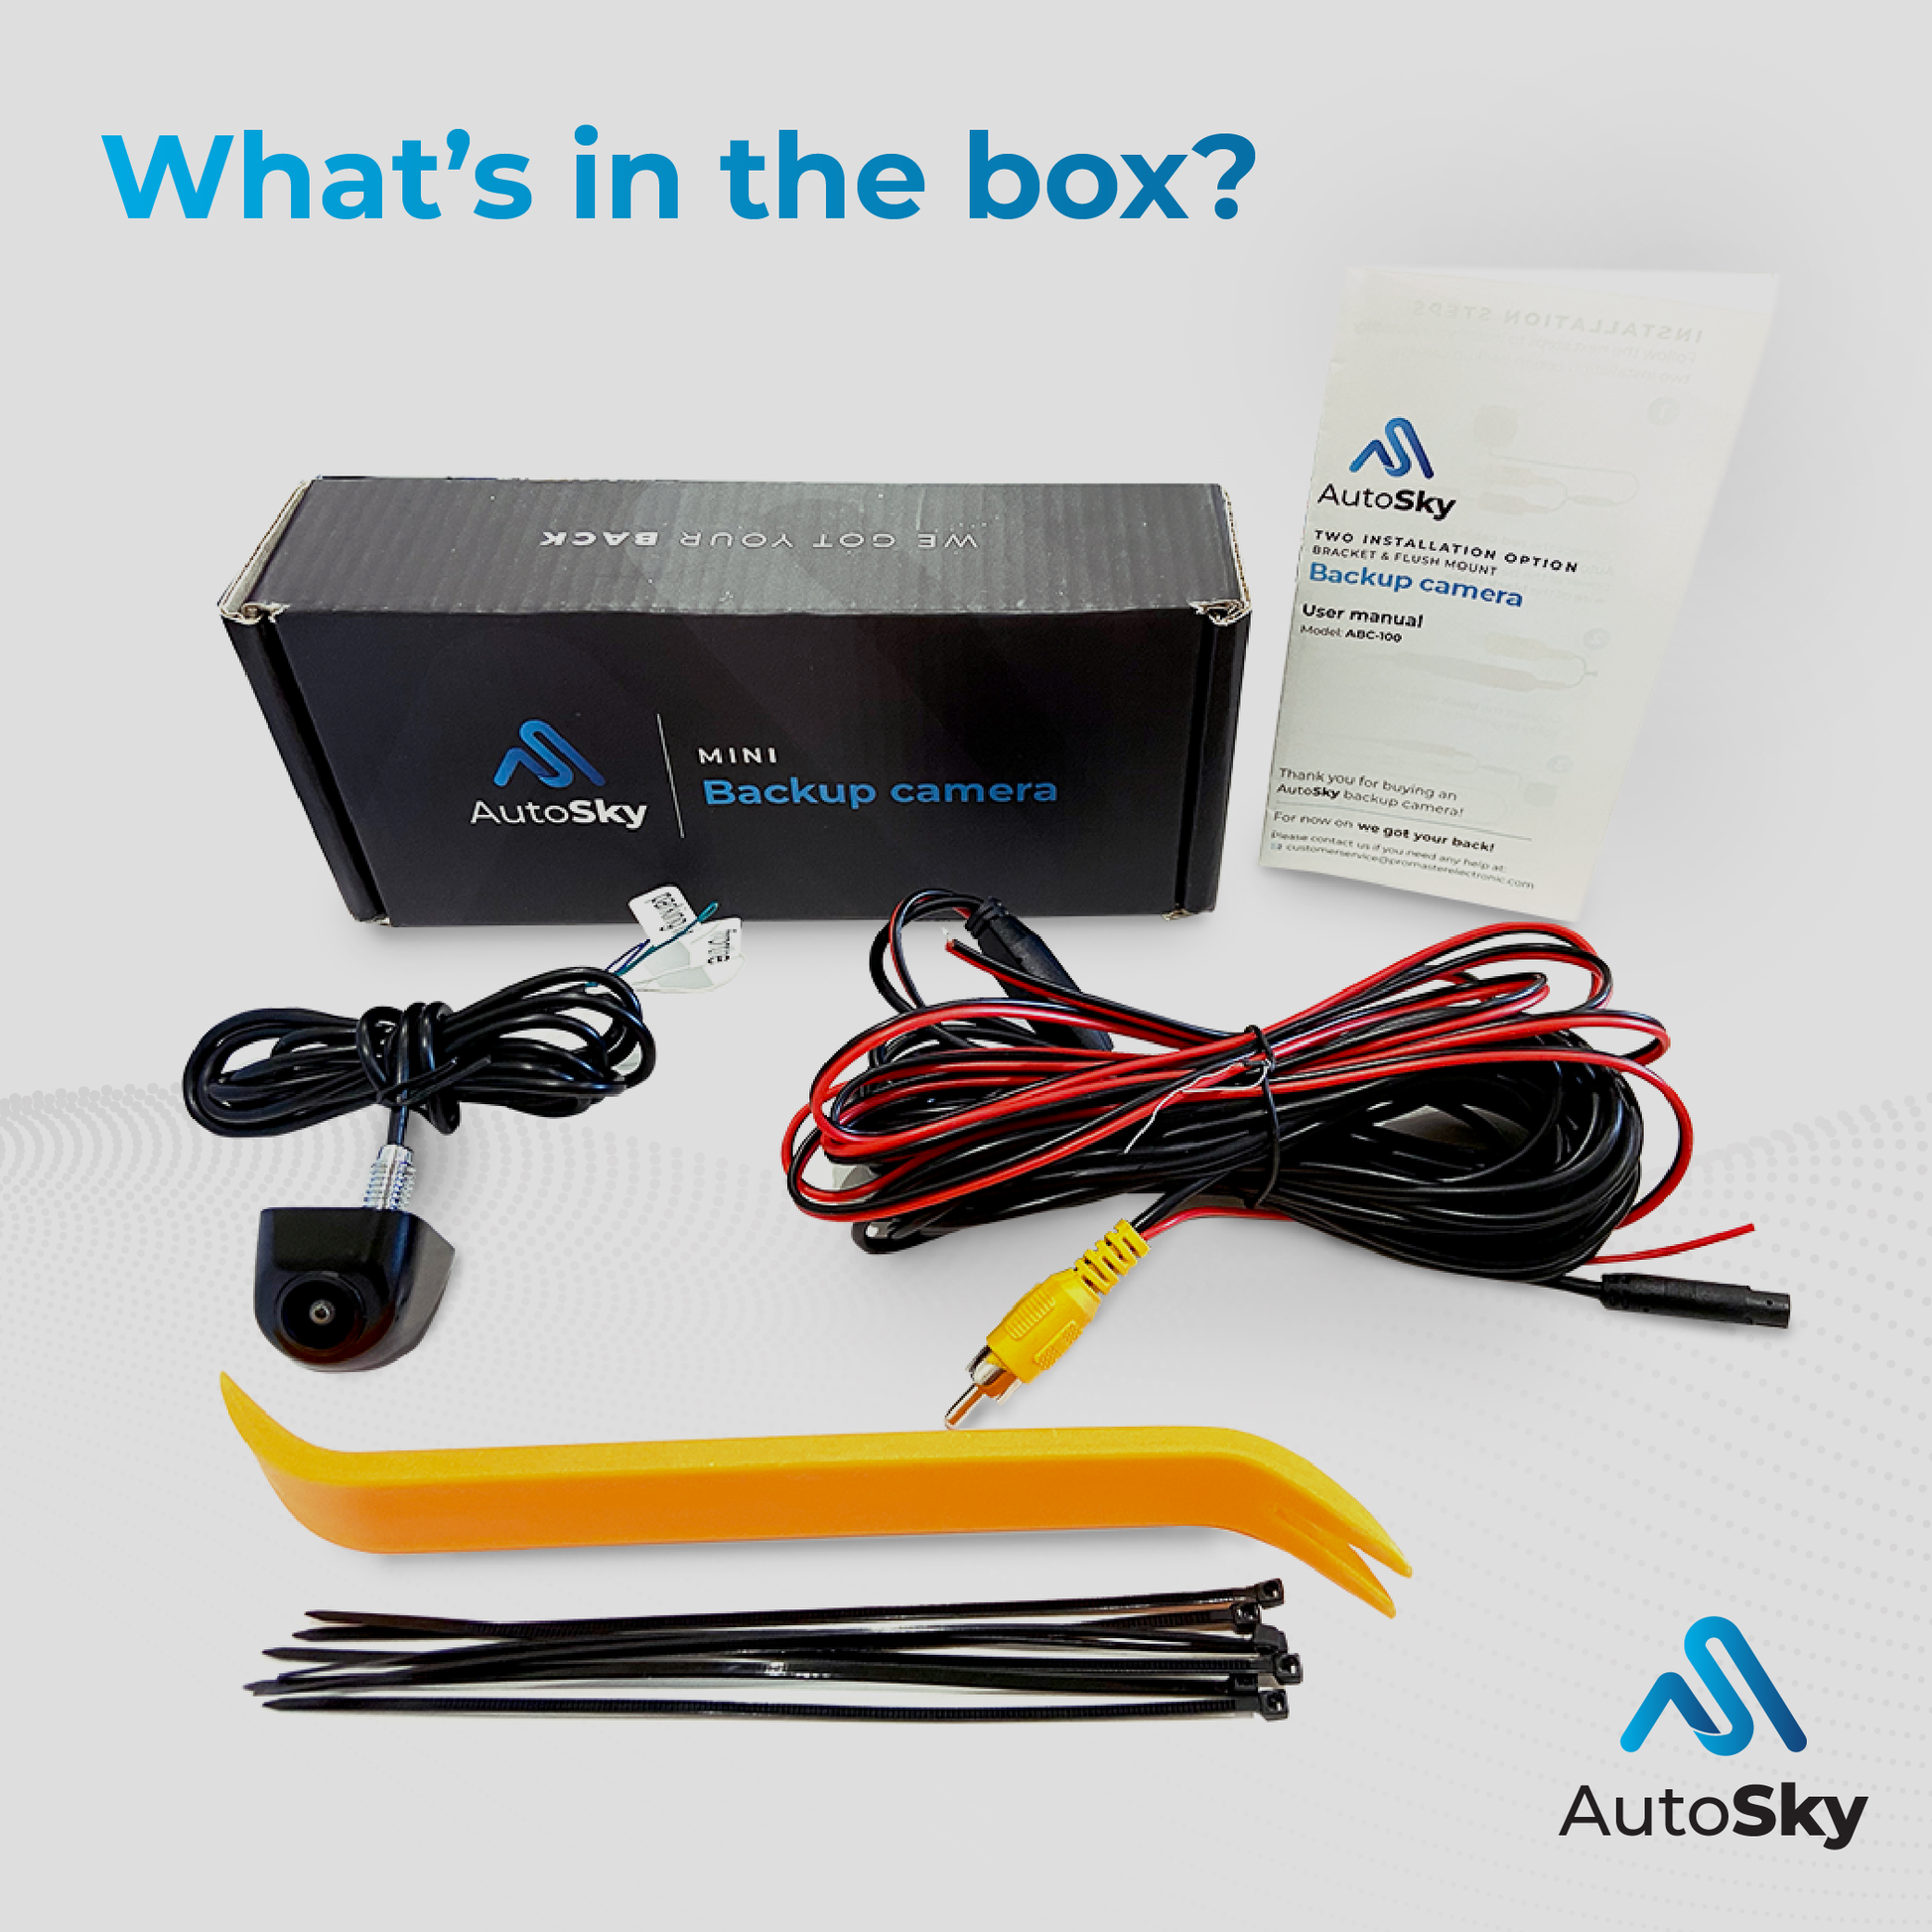 whats in the box AutoSky HD Back up Camera - Metal OEM Style housing, Waterproof, Night Vision and Ultra Wide Angle